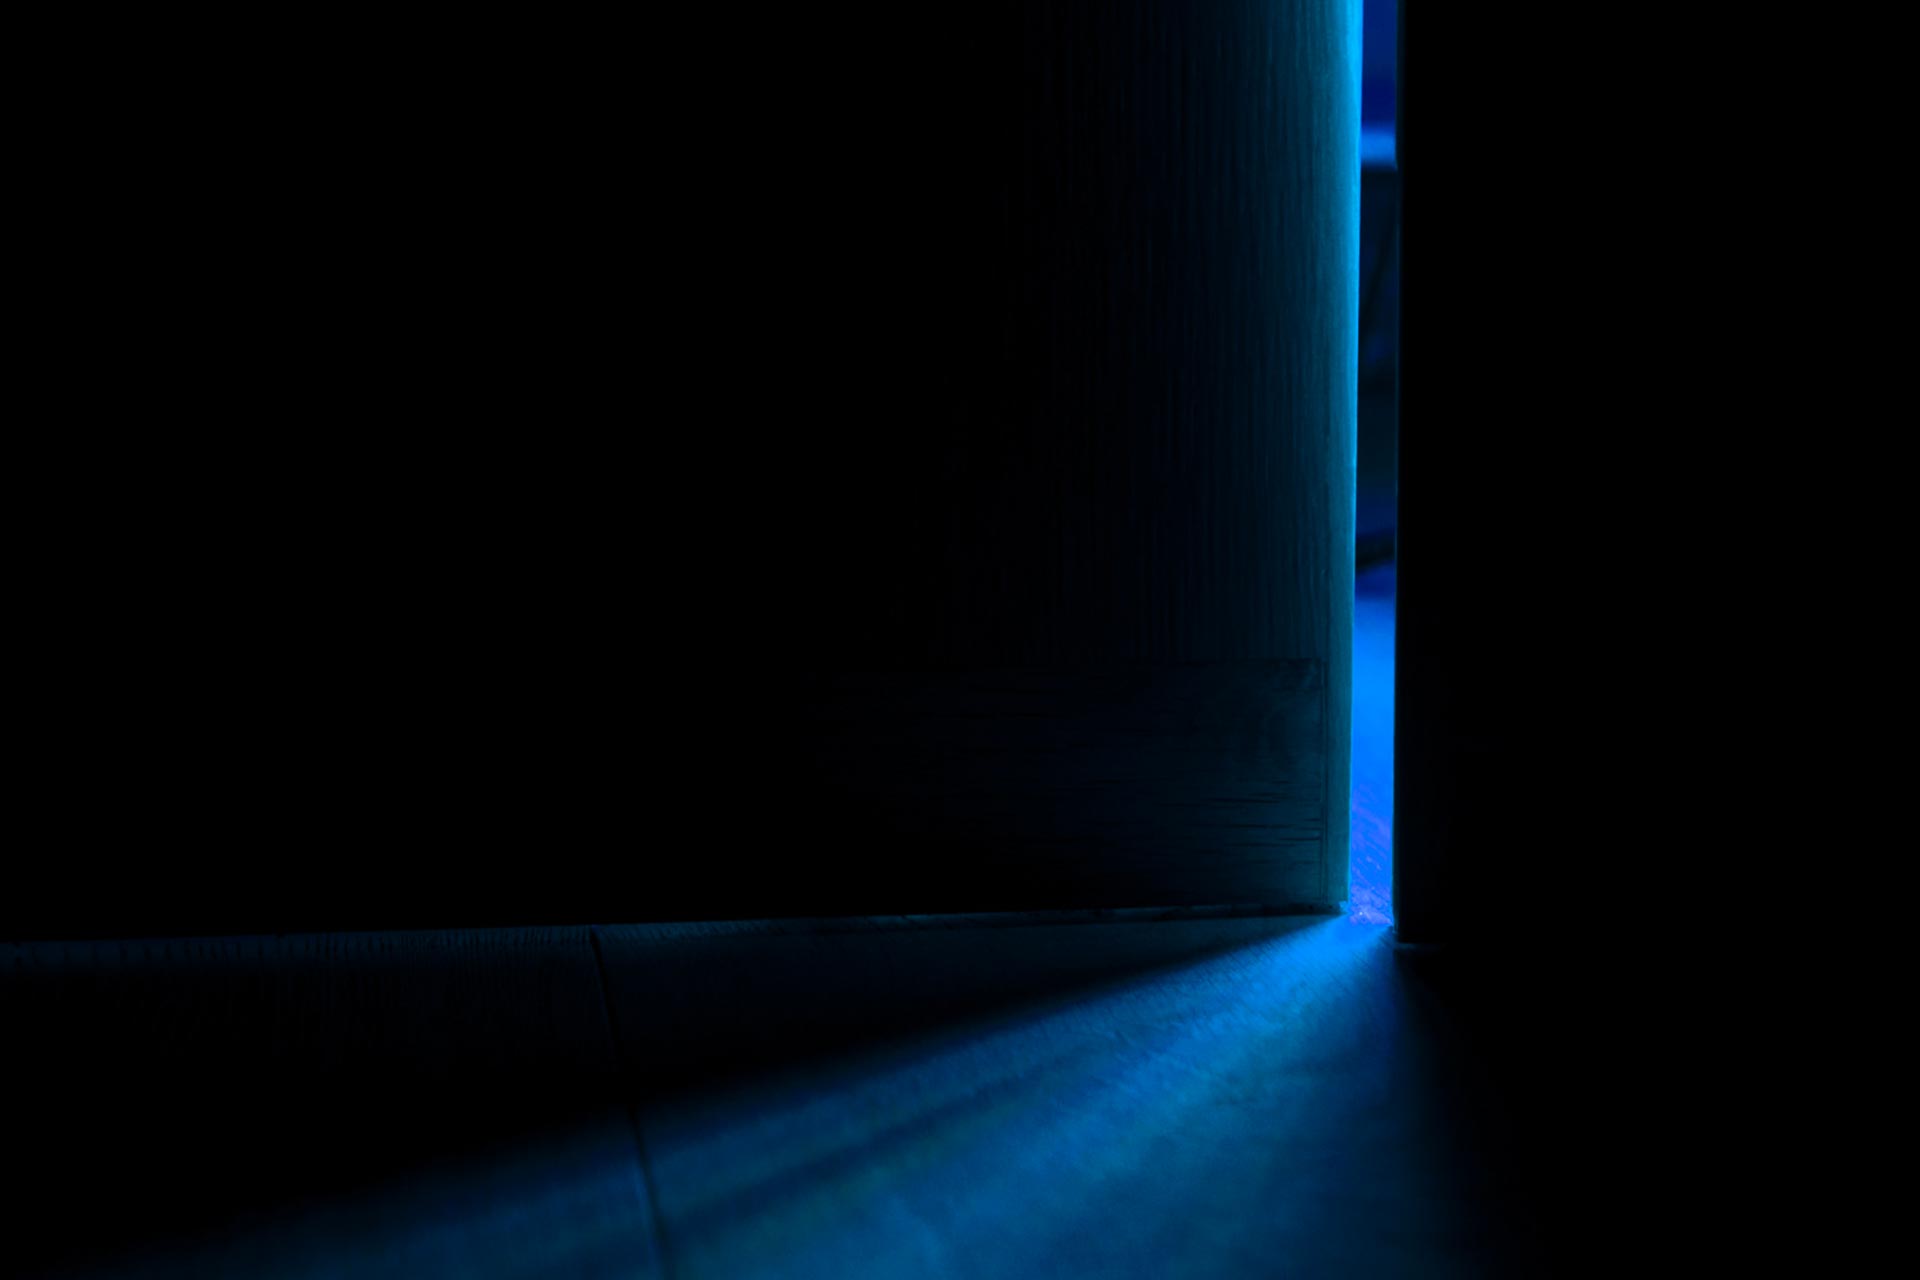 Dark room with door cracked open, letting in blue light, indicating fear and isolation